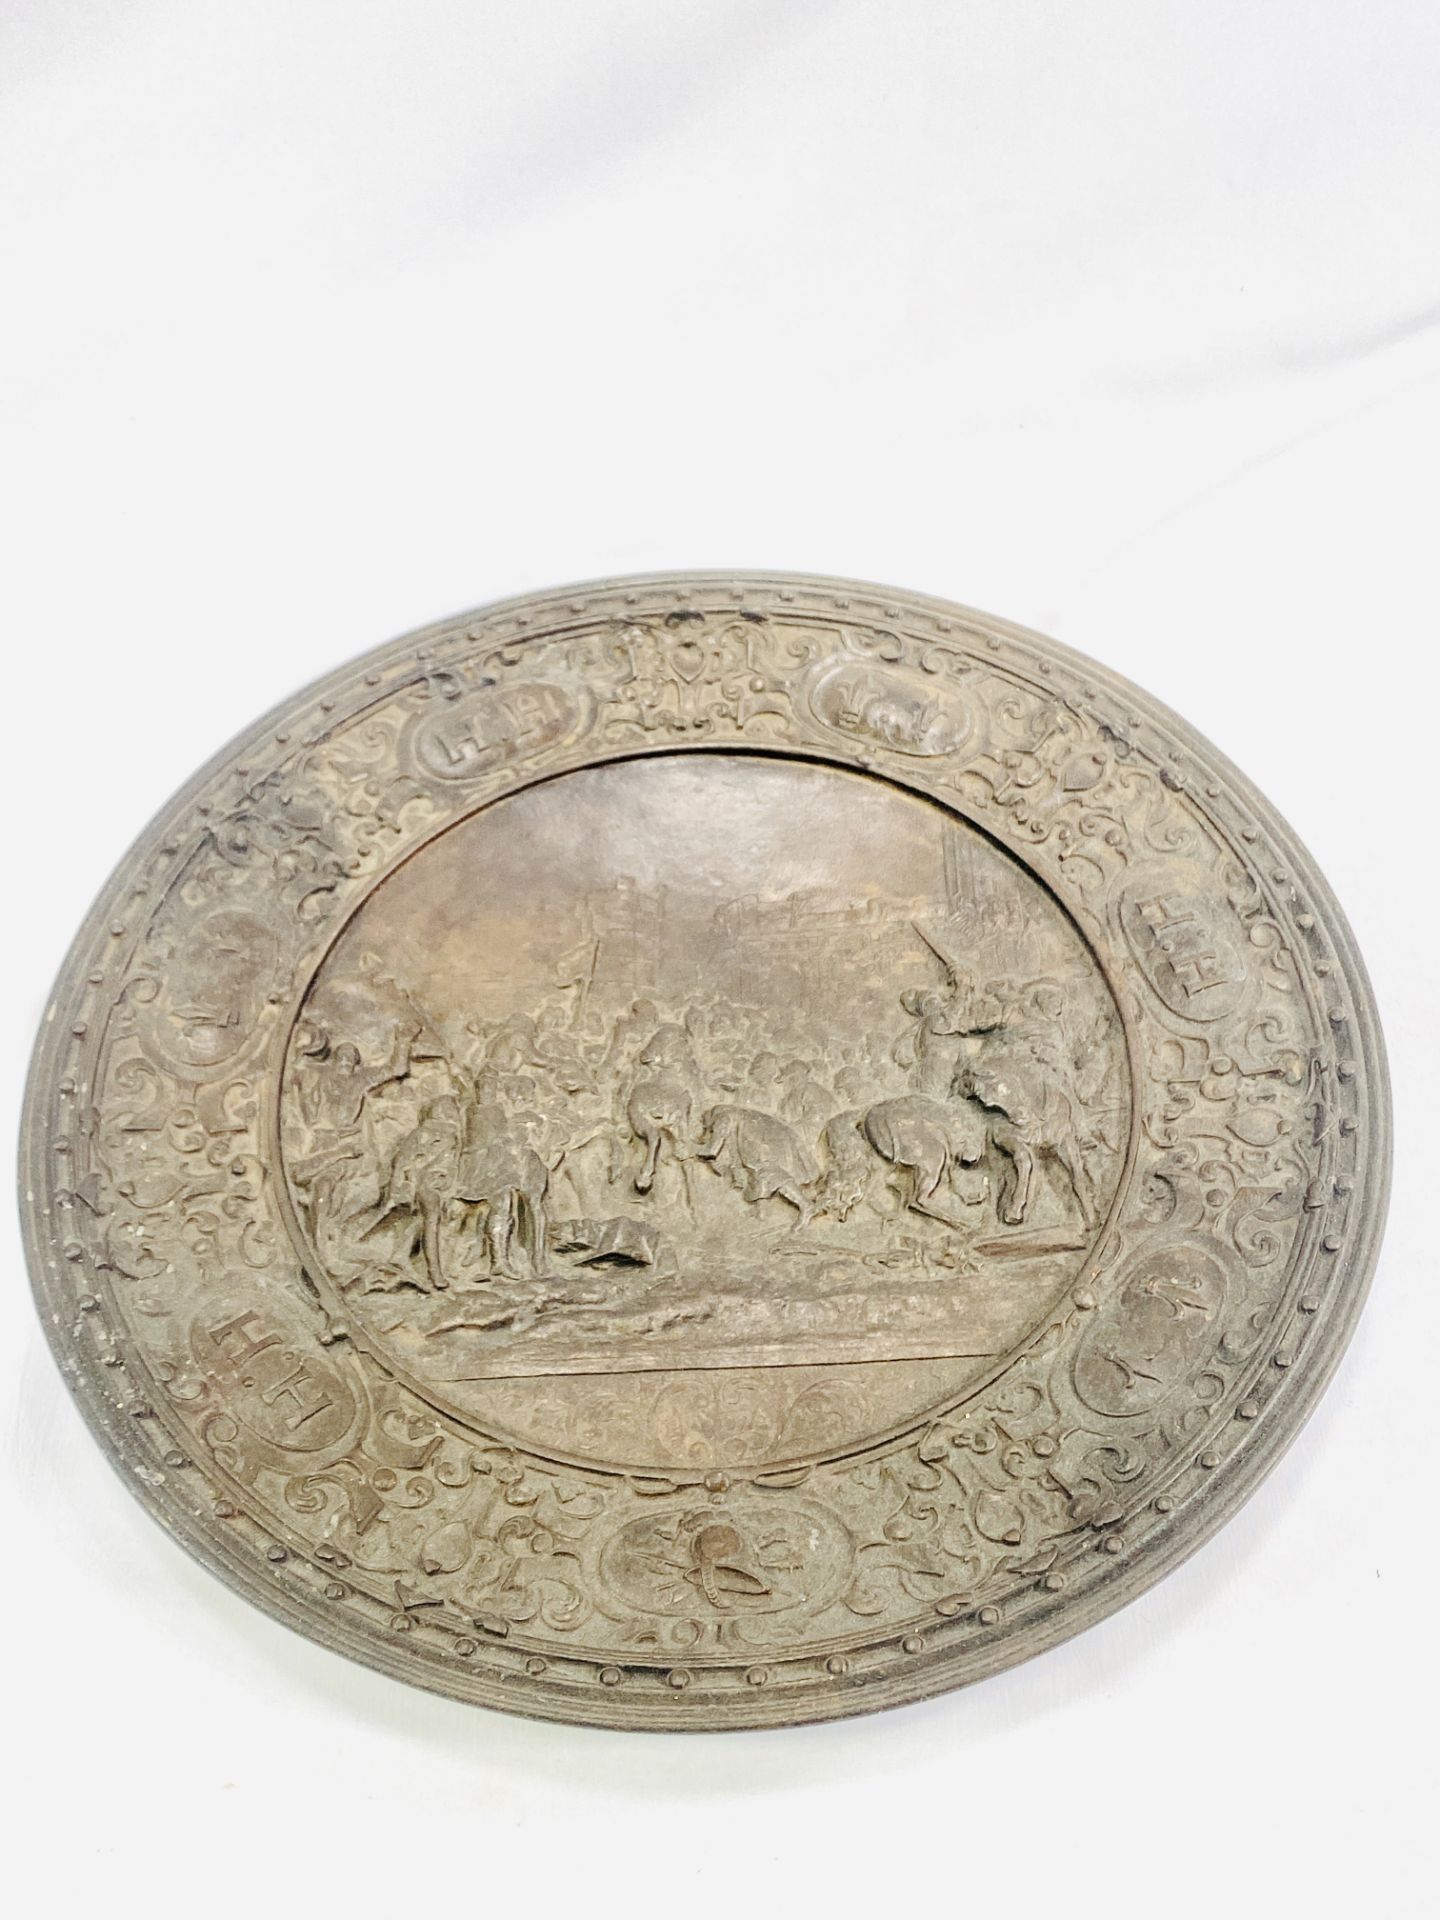 19th century cast metal charger - Image 4 of 6